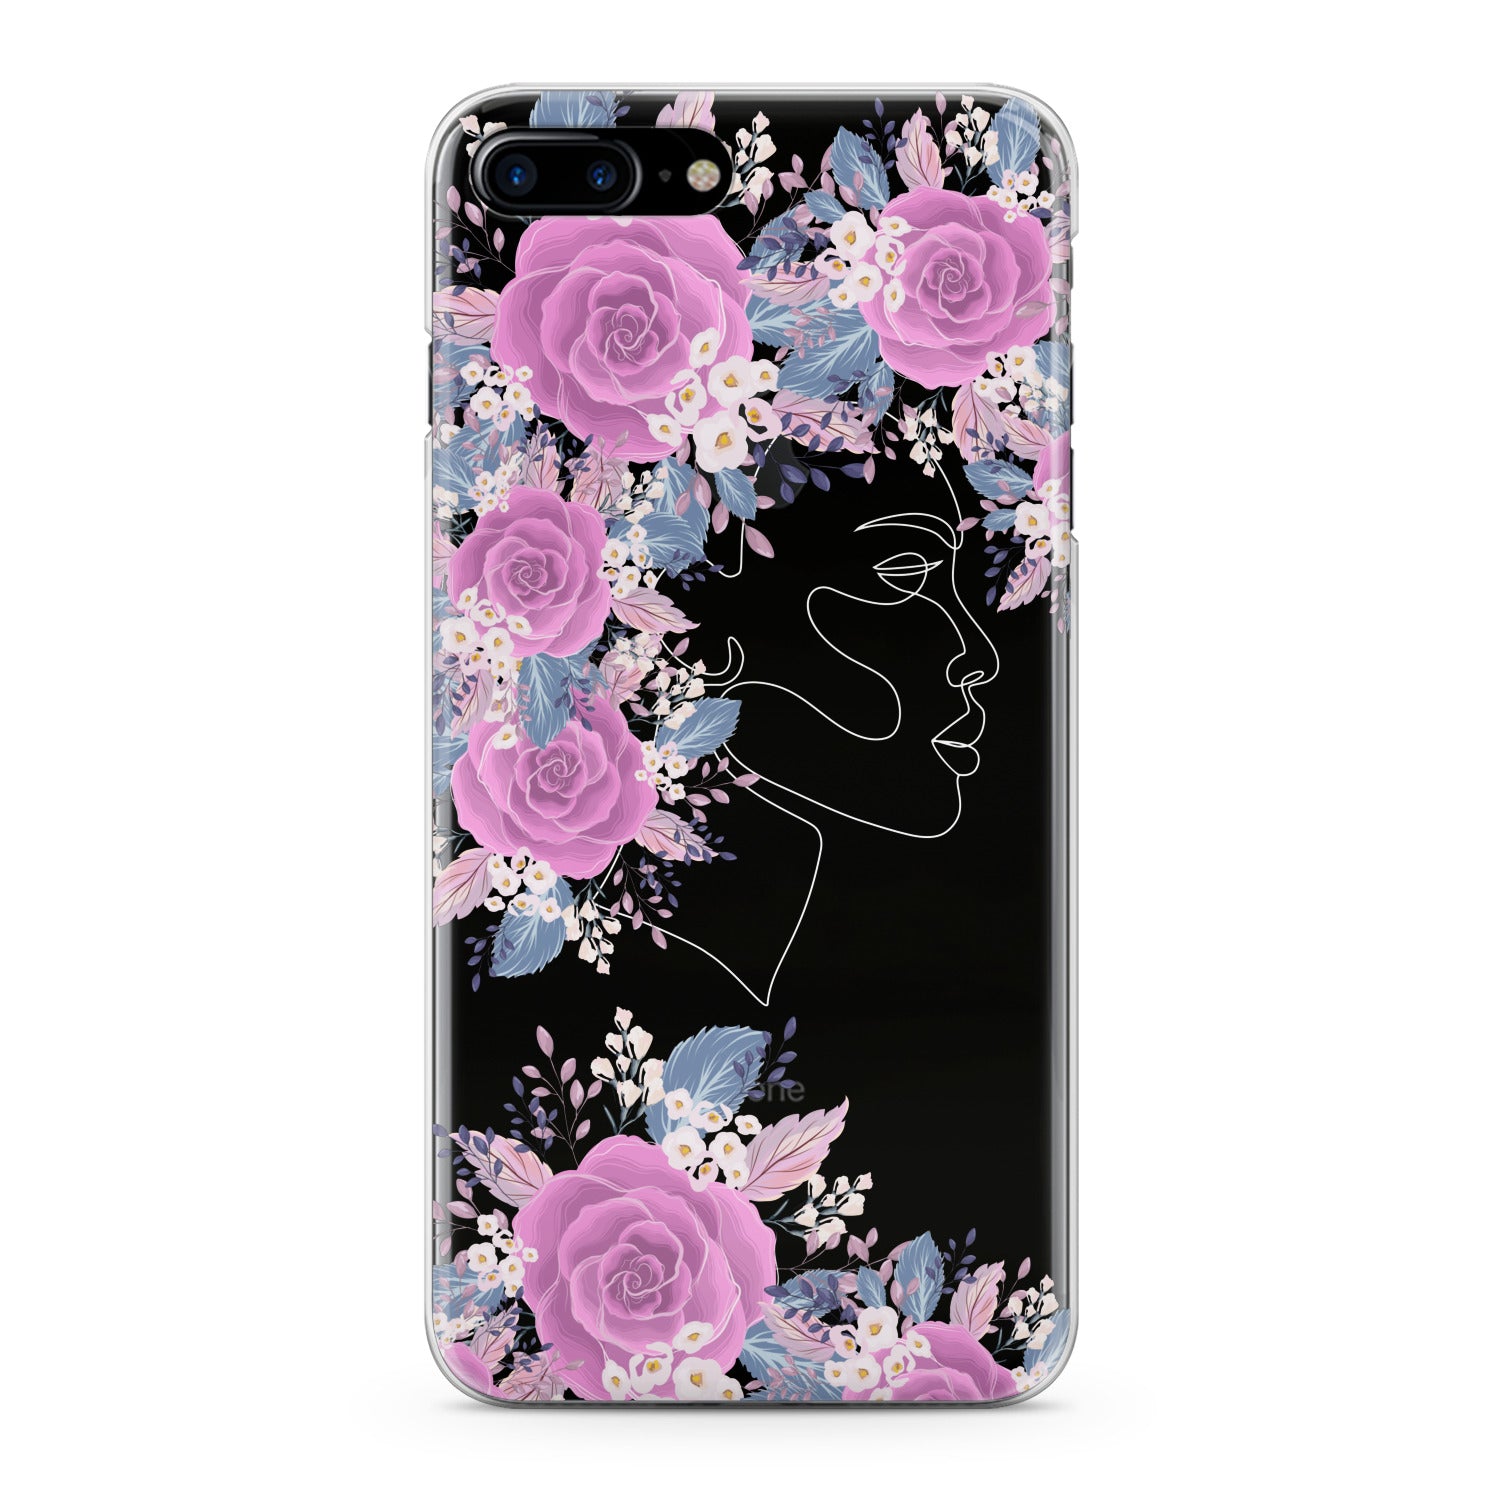 Lex Altern Floral Feminine Portrait Phone Case for your iPhone & Android phone.